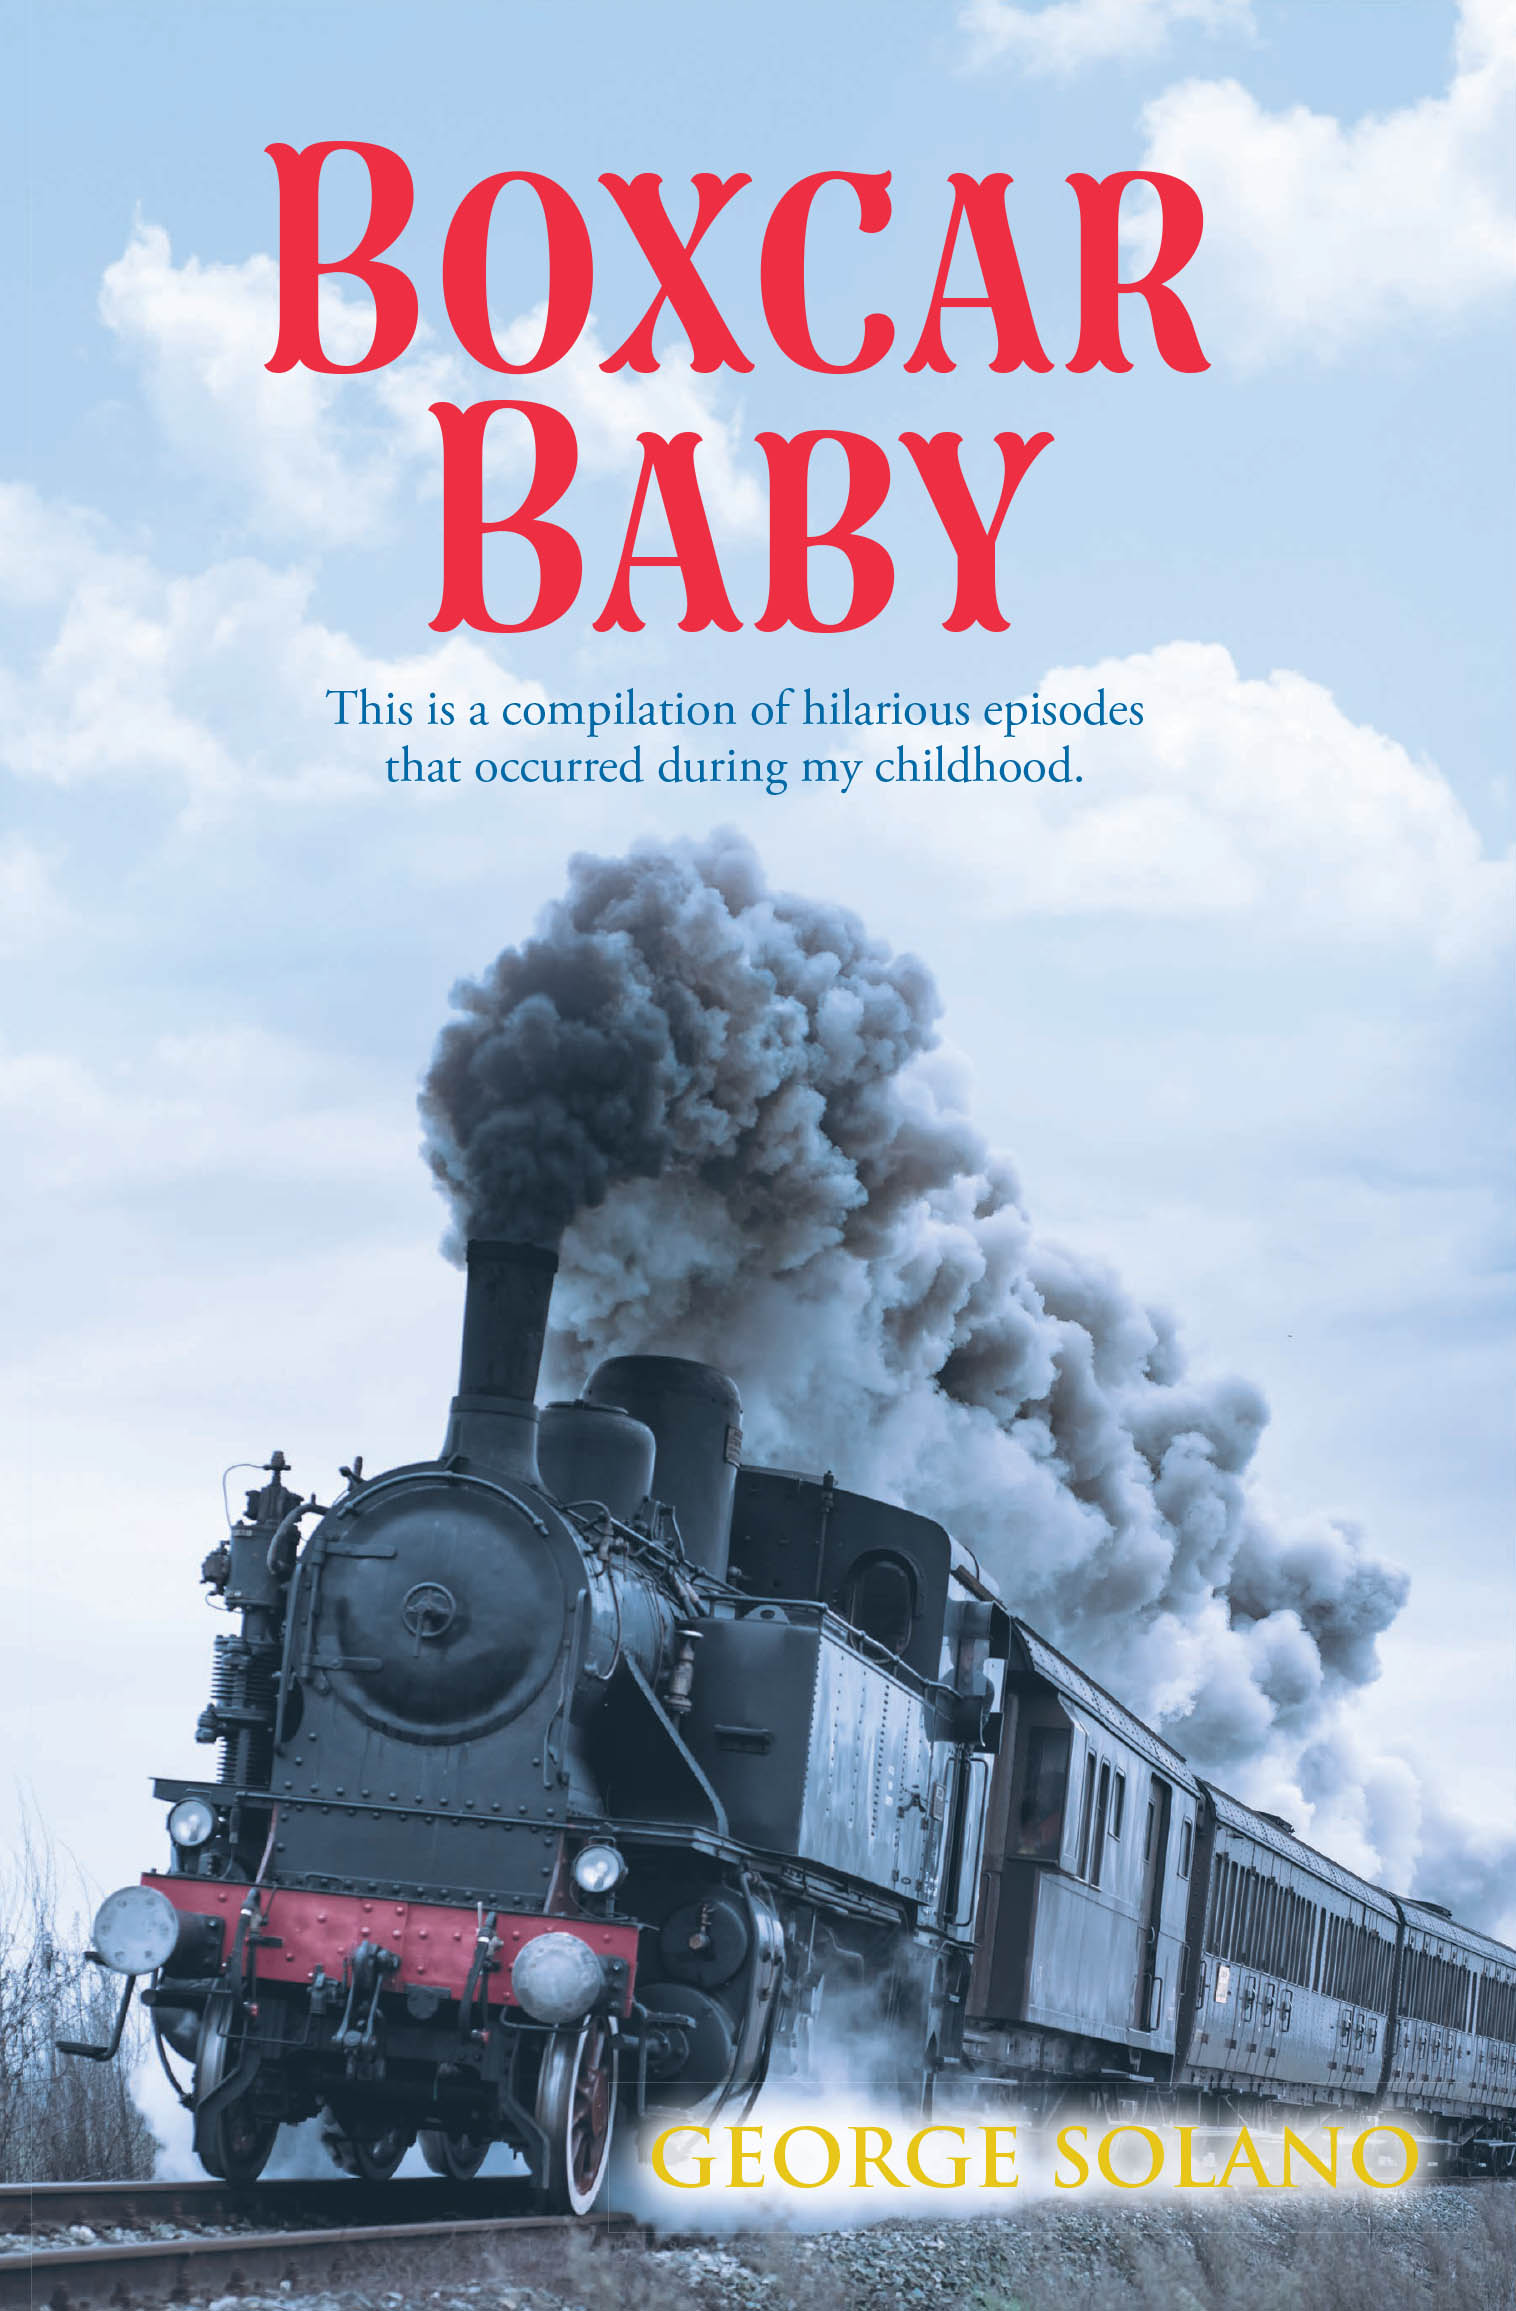 George Solano’s Newly Released “Boxcar Baby: This is a compilation of hilarious episodes that occurred during my childhood.” is a Nostalgic and Entertaining Memoir